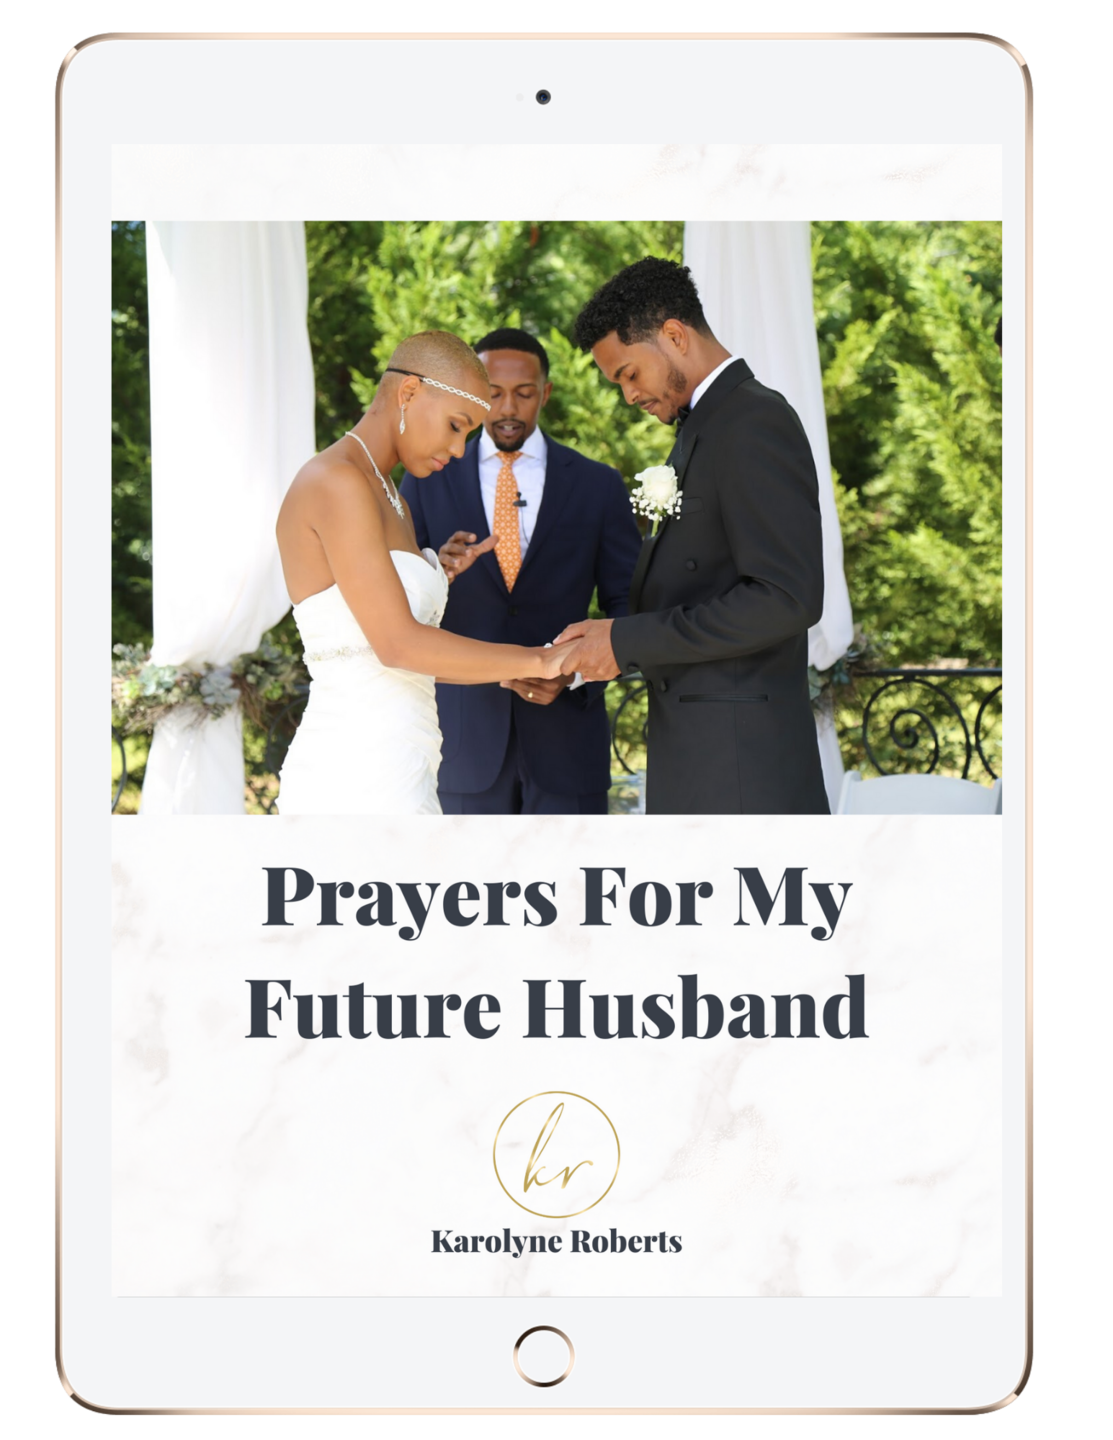 Prayers for My Future Husband Guide